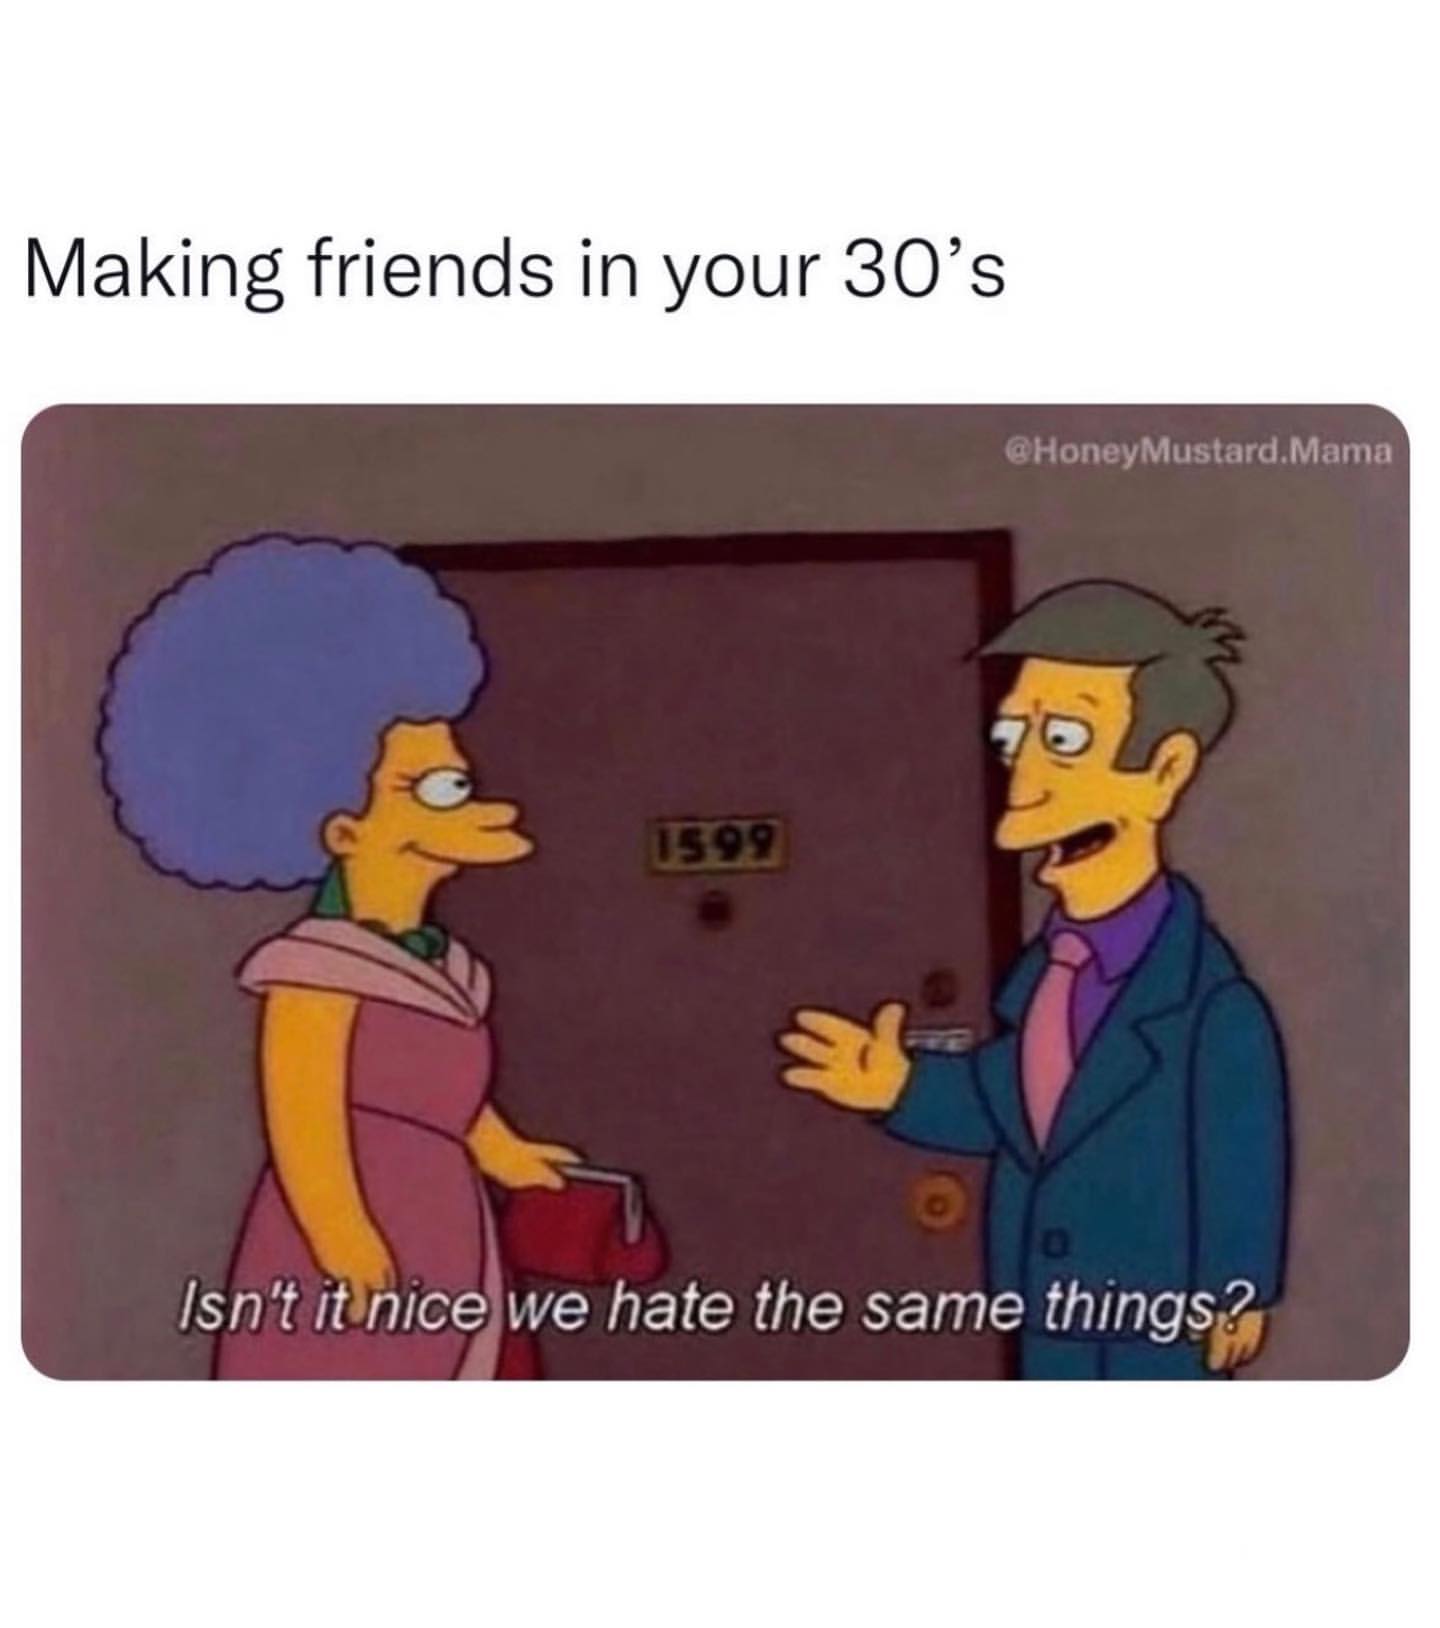 Making friends in your 30's. Isn't it nice we hate the same things?